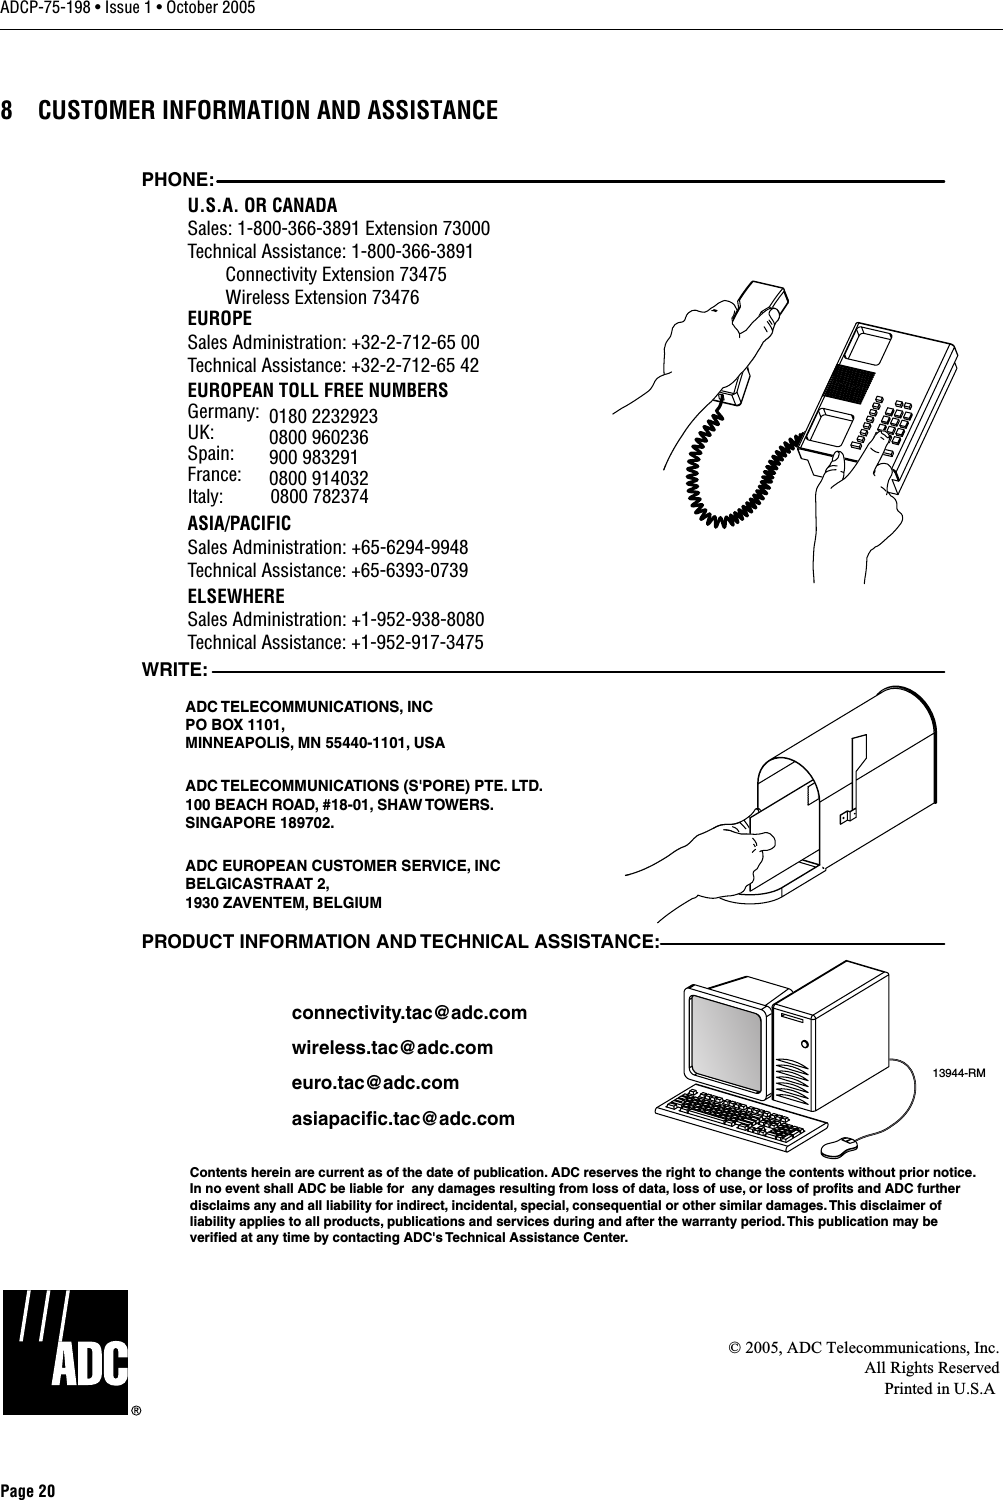 ADCP-75-198 • Issue 1 • October 2005Page 208 CUSTOMER INFORMATION AND ASSISTANCE© 2005, ADC Telecommunications, Inc.All Rights ReservedPrinted in U.S.A13944-RMWRITE:ADC TELECOMMUNICATIONS,  INCPO BOX 1101,MINNEAPOLIS, MN 55440-1101, USAADC TELECOMMUNICATIONS (S&apos;PORE) PTE. LTD.100 BEACH ROAD, #18-01, SHAW TOWERS.SINGAPORE 189702.ADC EUROPEAN CUSTOMER SERVICE, INCBELGICASTRAAT 2,1930 ZAVENTEM, BELGIUMPHONE:EUROPESales Administration: +32-2-712-65 00Technical Assistance: +32-2-712-65 42EUROPEAN TOLL FREE NUMBERSUK: 0800 960236Spain: 900 983291France: 0800 914032Germany: 0180 2232923U.S.A. OR CANADASales: 1-800-366-3891 Extension 73000Technical Assistance: 1-800-366-3891        Connectivity Extension 73475        Wireless Extension 73476ASIA/PACIFICSales Administration: +65-6294-9948Technical Assistance: +65-6393-0739ELSEWHERESales Administration: +1-952-938-8080Technical Assistance: +1-952-917-3475Italy:          0800 782374PRODUCT INFORMATION AND TECHNICAL ASSISTANCE:Contents herein are current as of the date of publication. ADC reserves the right to change the contents without prior notice.In no event shall ADC be liable for  any damages resulting from loss of data, loss of use, or loss of profits and ADC furtherdisclaims any and all liability for indirect, incidental, special, consequential or other similar damages. This disclaimer ofliability applies to all products, publications and services during and after the warranty period. This publication may beverified at any time by contacting ADC&apos;s Technical Assistance Center. euro.tac@adc.comasiapacific.tac@adc.comwireless.tac@adc.comconnectivity.tac@adc.com